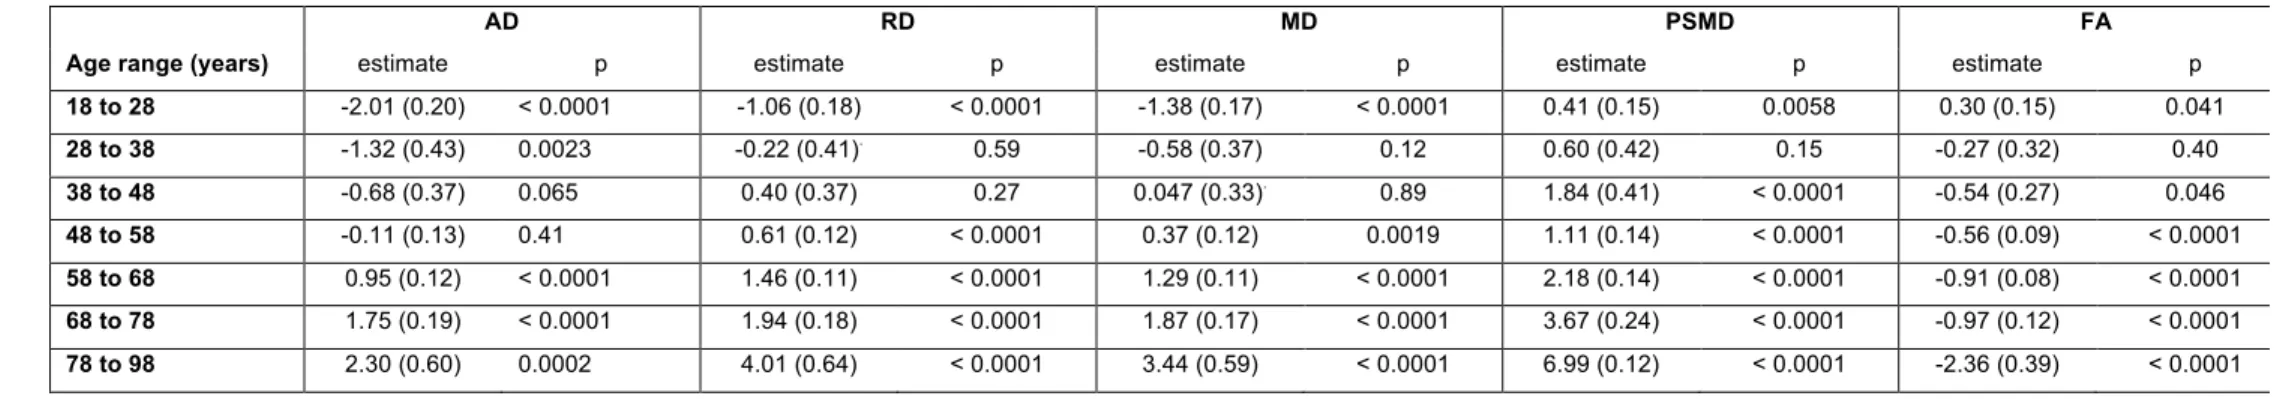 Table 4. ANOVA effect of age (estimate (standard error) and significance p-value) on five DTI metrics (AD, RD, MD, PSMD, and FA evaluated across individual FA 